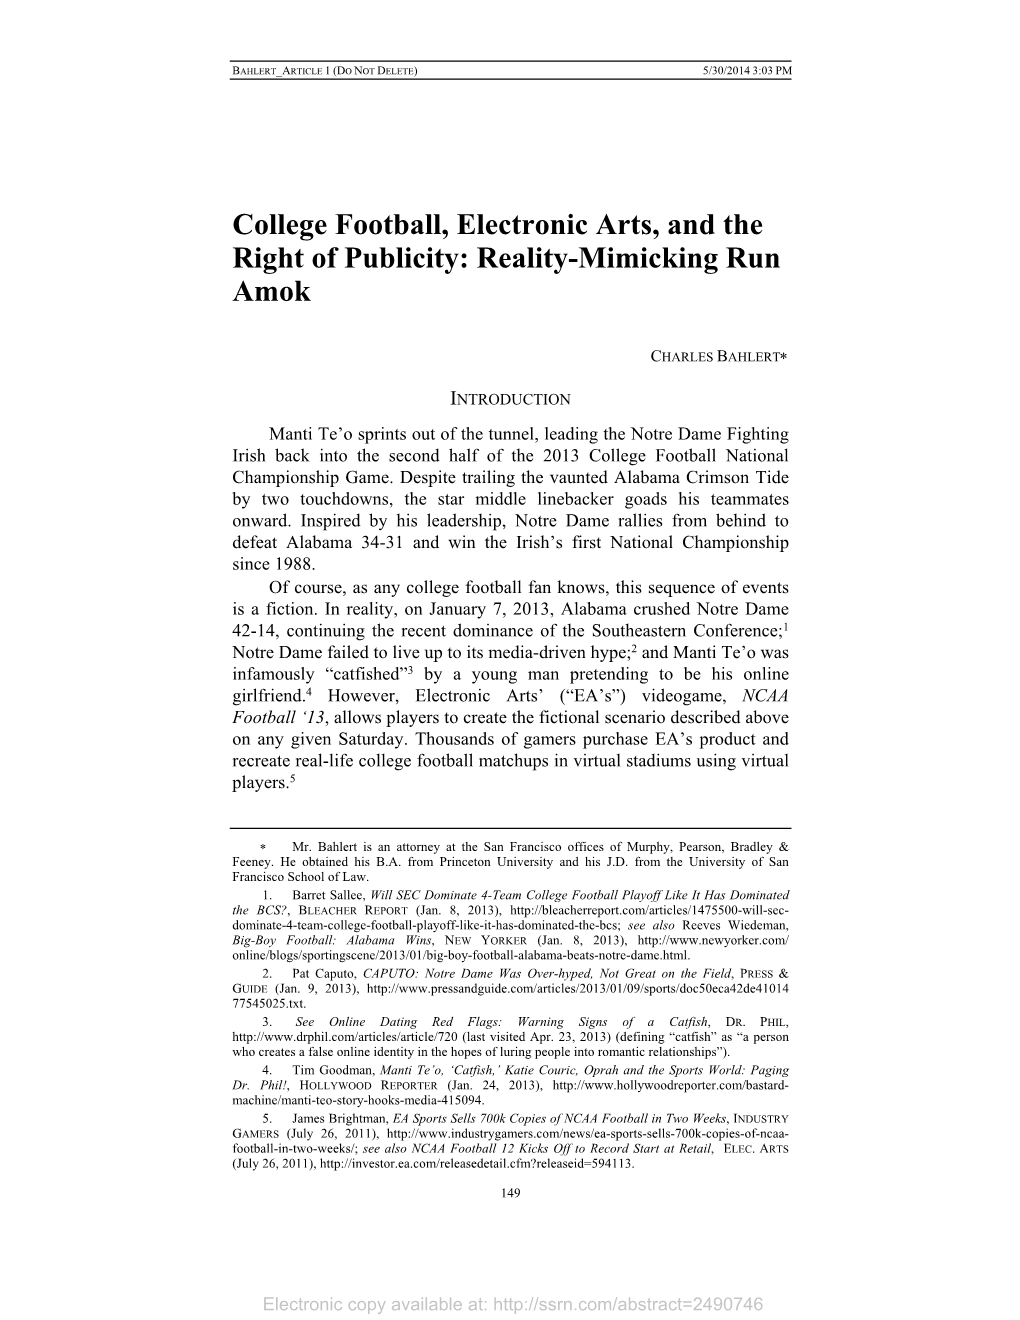 College Football, Electronic Arts, and the Right of Publicity: Reality-Mimicking Run Amok